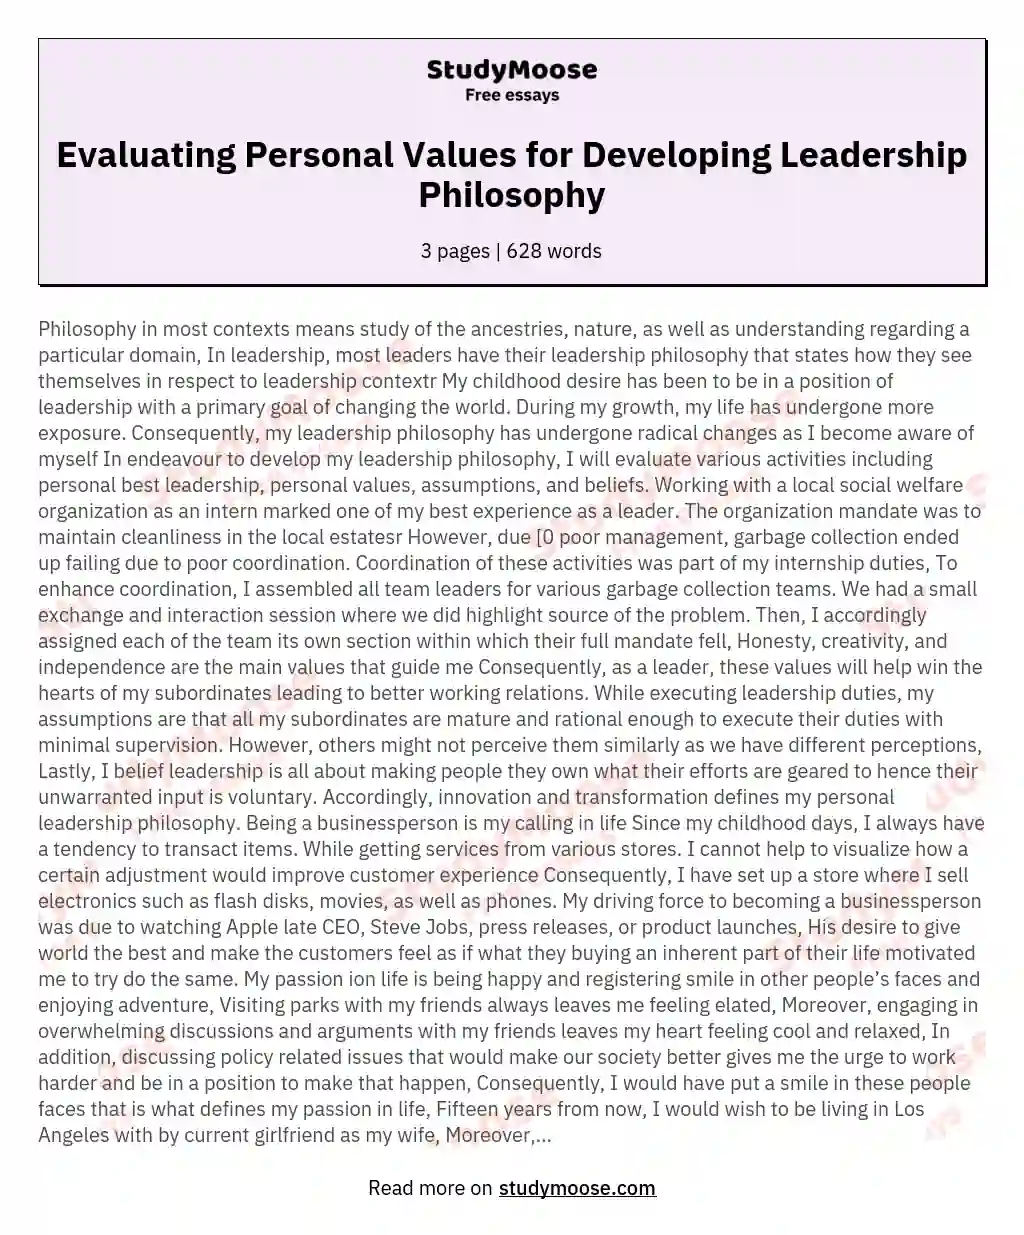 Evaluating Personal Values for Developing Leadership Philosophy essay